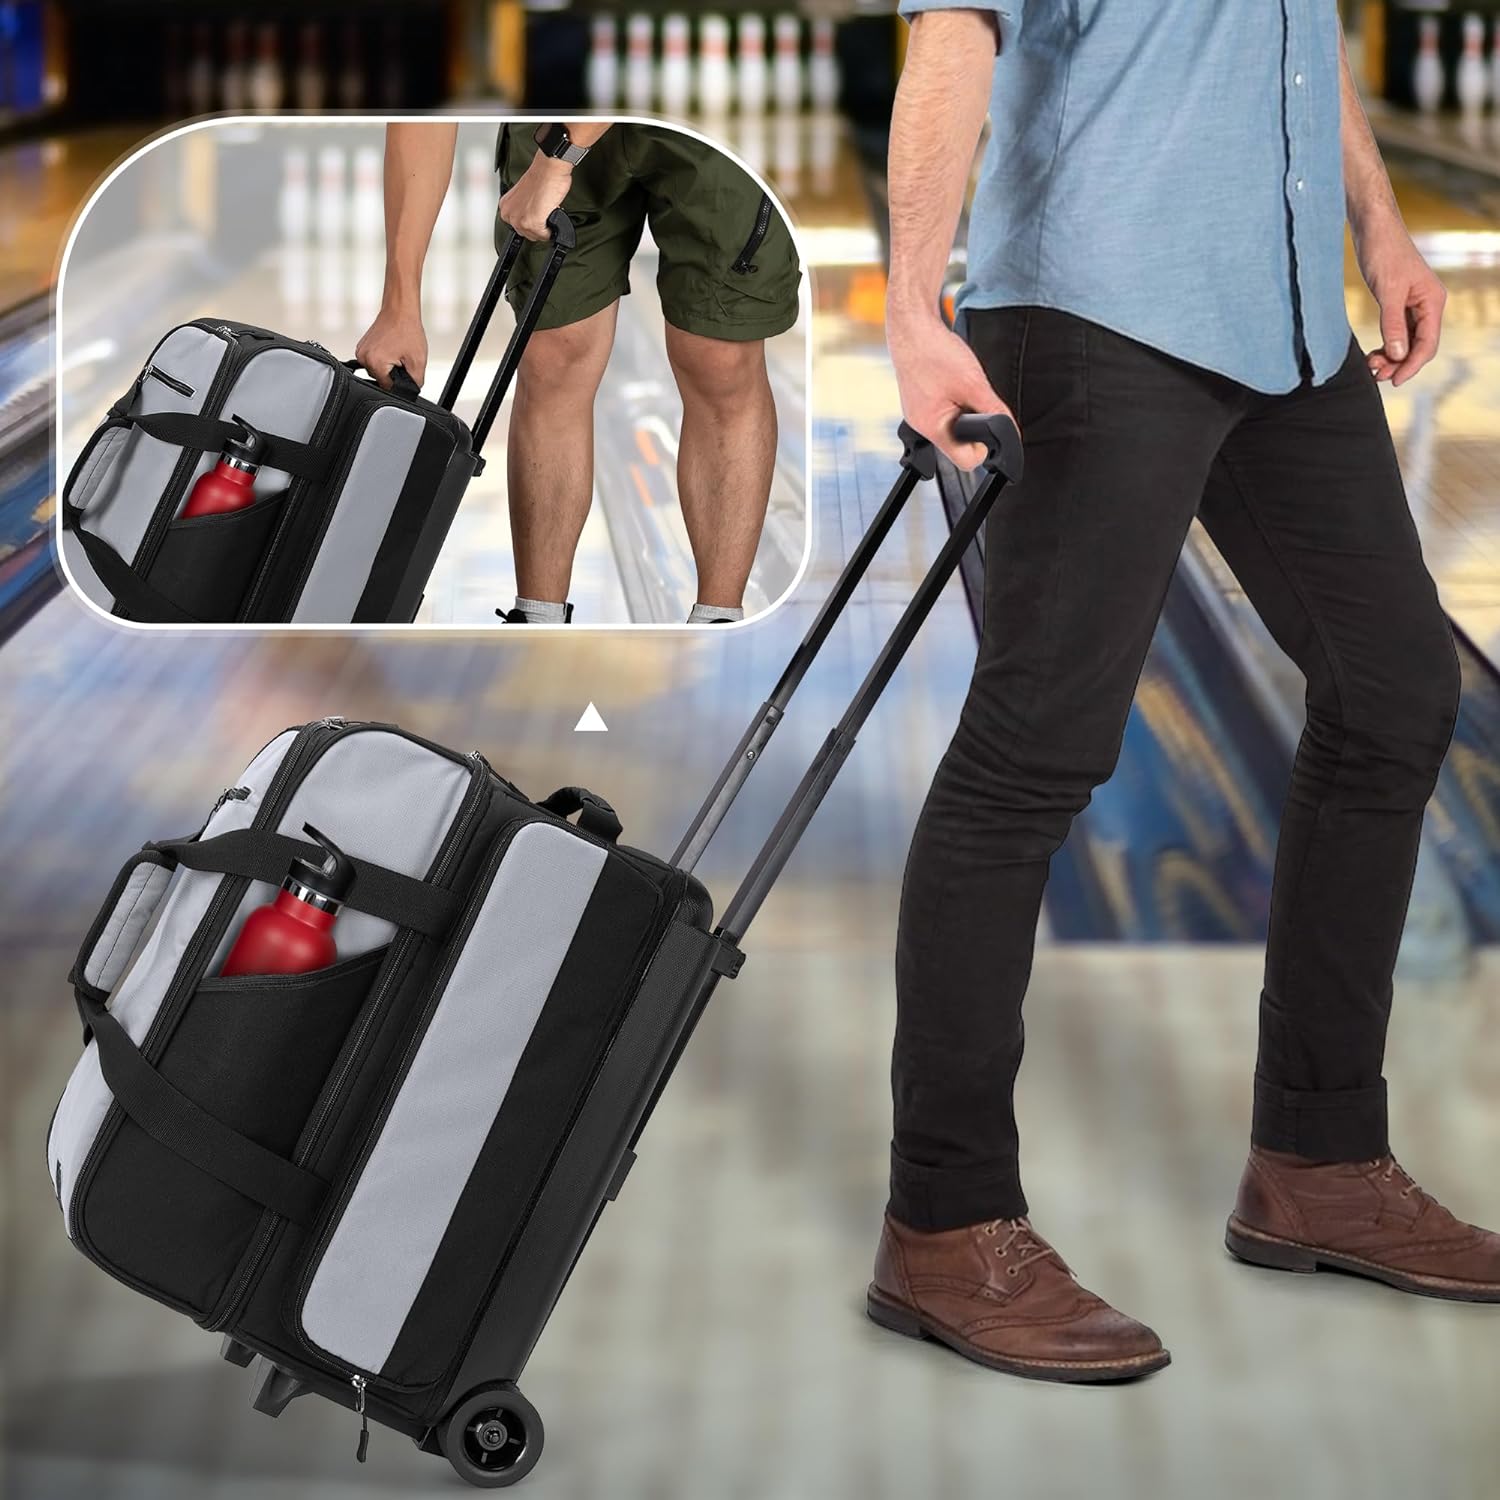 GOBUROS 2 Bowling Ball Roller Bag with Large Shoes Compartment(Up To US Mens Size 16), Bowling Bag with Wheels, Retractable Handle (Extends to 40) and Multiple Functional Organizer Pockets